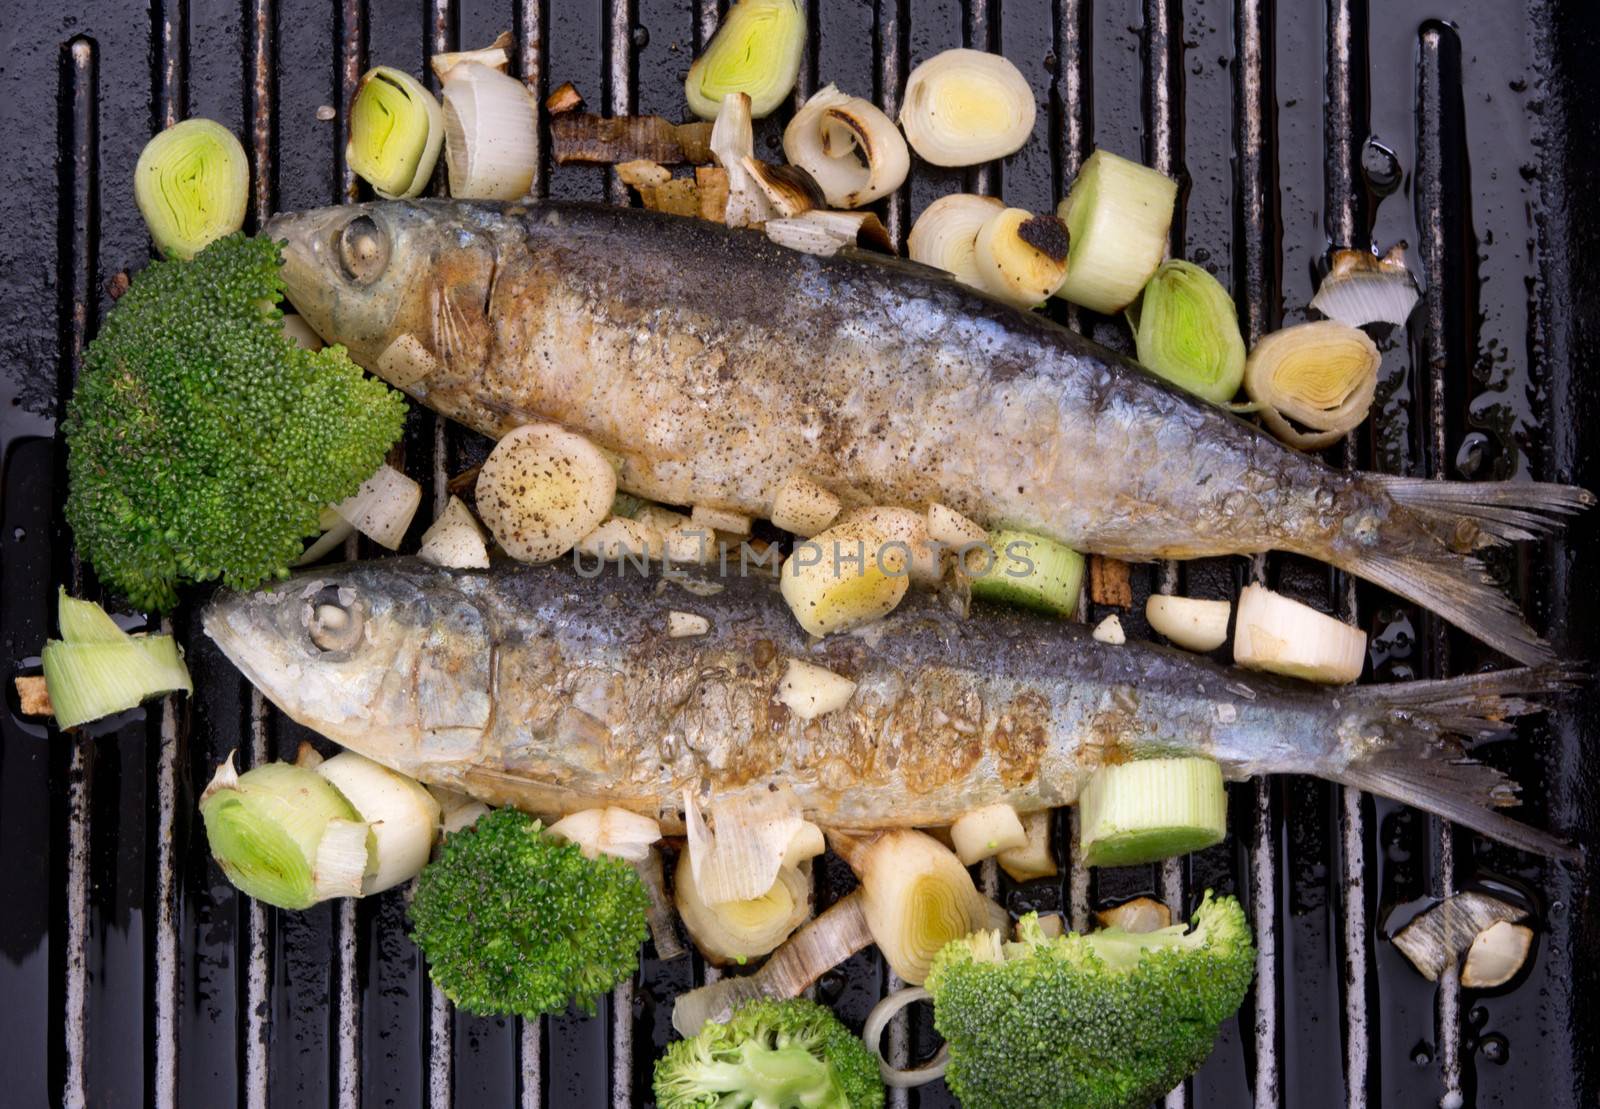 Fresh sardines cooked on a griddle with leek and broccoli.